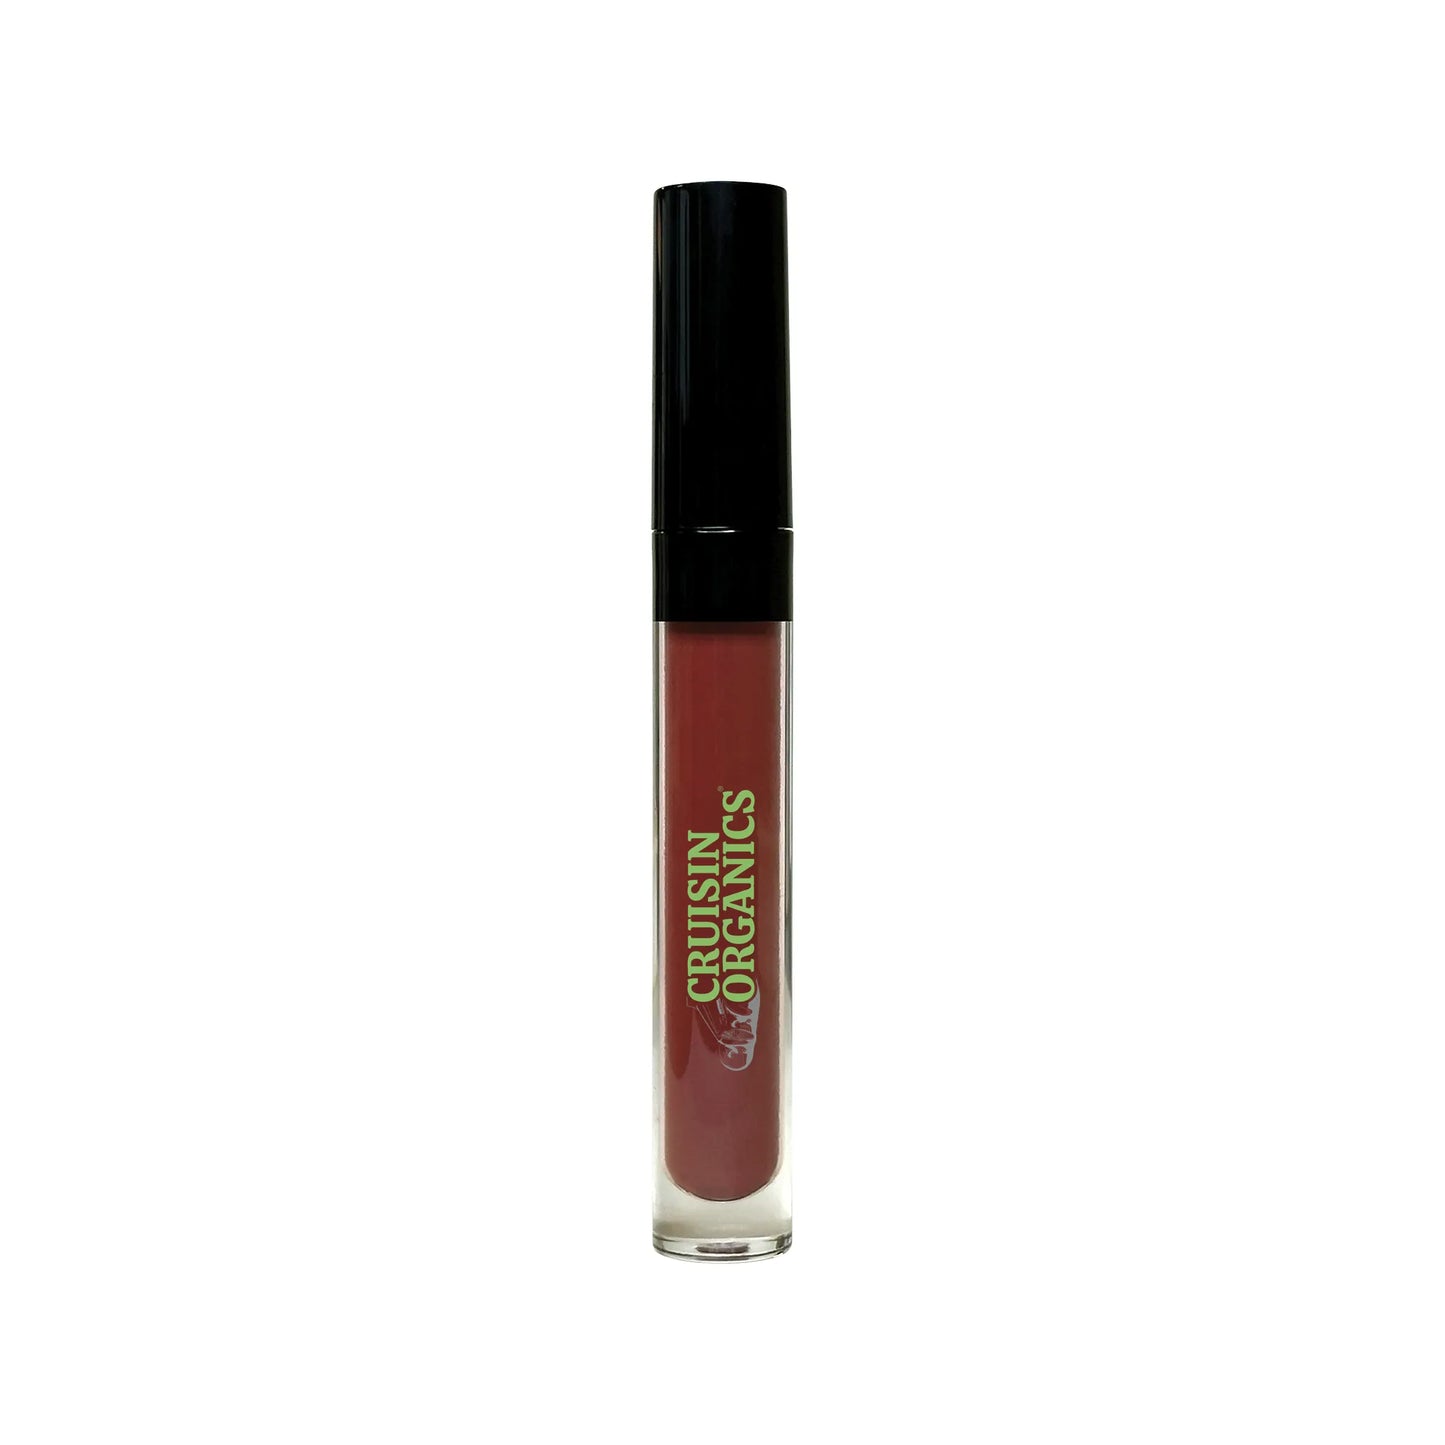 Introducing the Cruisin Organics Brickhouse Liquid to Matte Lipstick—an embodiment of the most trendy colors accompanied by comfortable all-day wear that conveniently fits in your back pocket. Immerse yourself in the realm of highly pigmented shades, perfect for any occasion. The Liquid to Matte Lipstick features a slanted doe applicator that guarantees precise, hassle-free application, ensuring the Liquid to Matte Lipstick glides on effortlessly. Enhanced with a velvety finish 